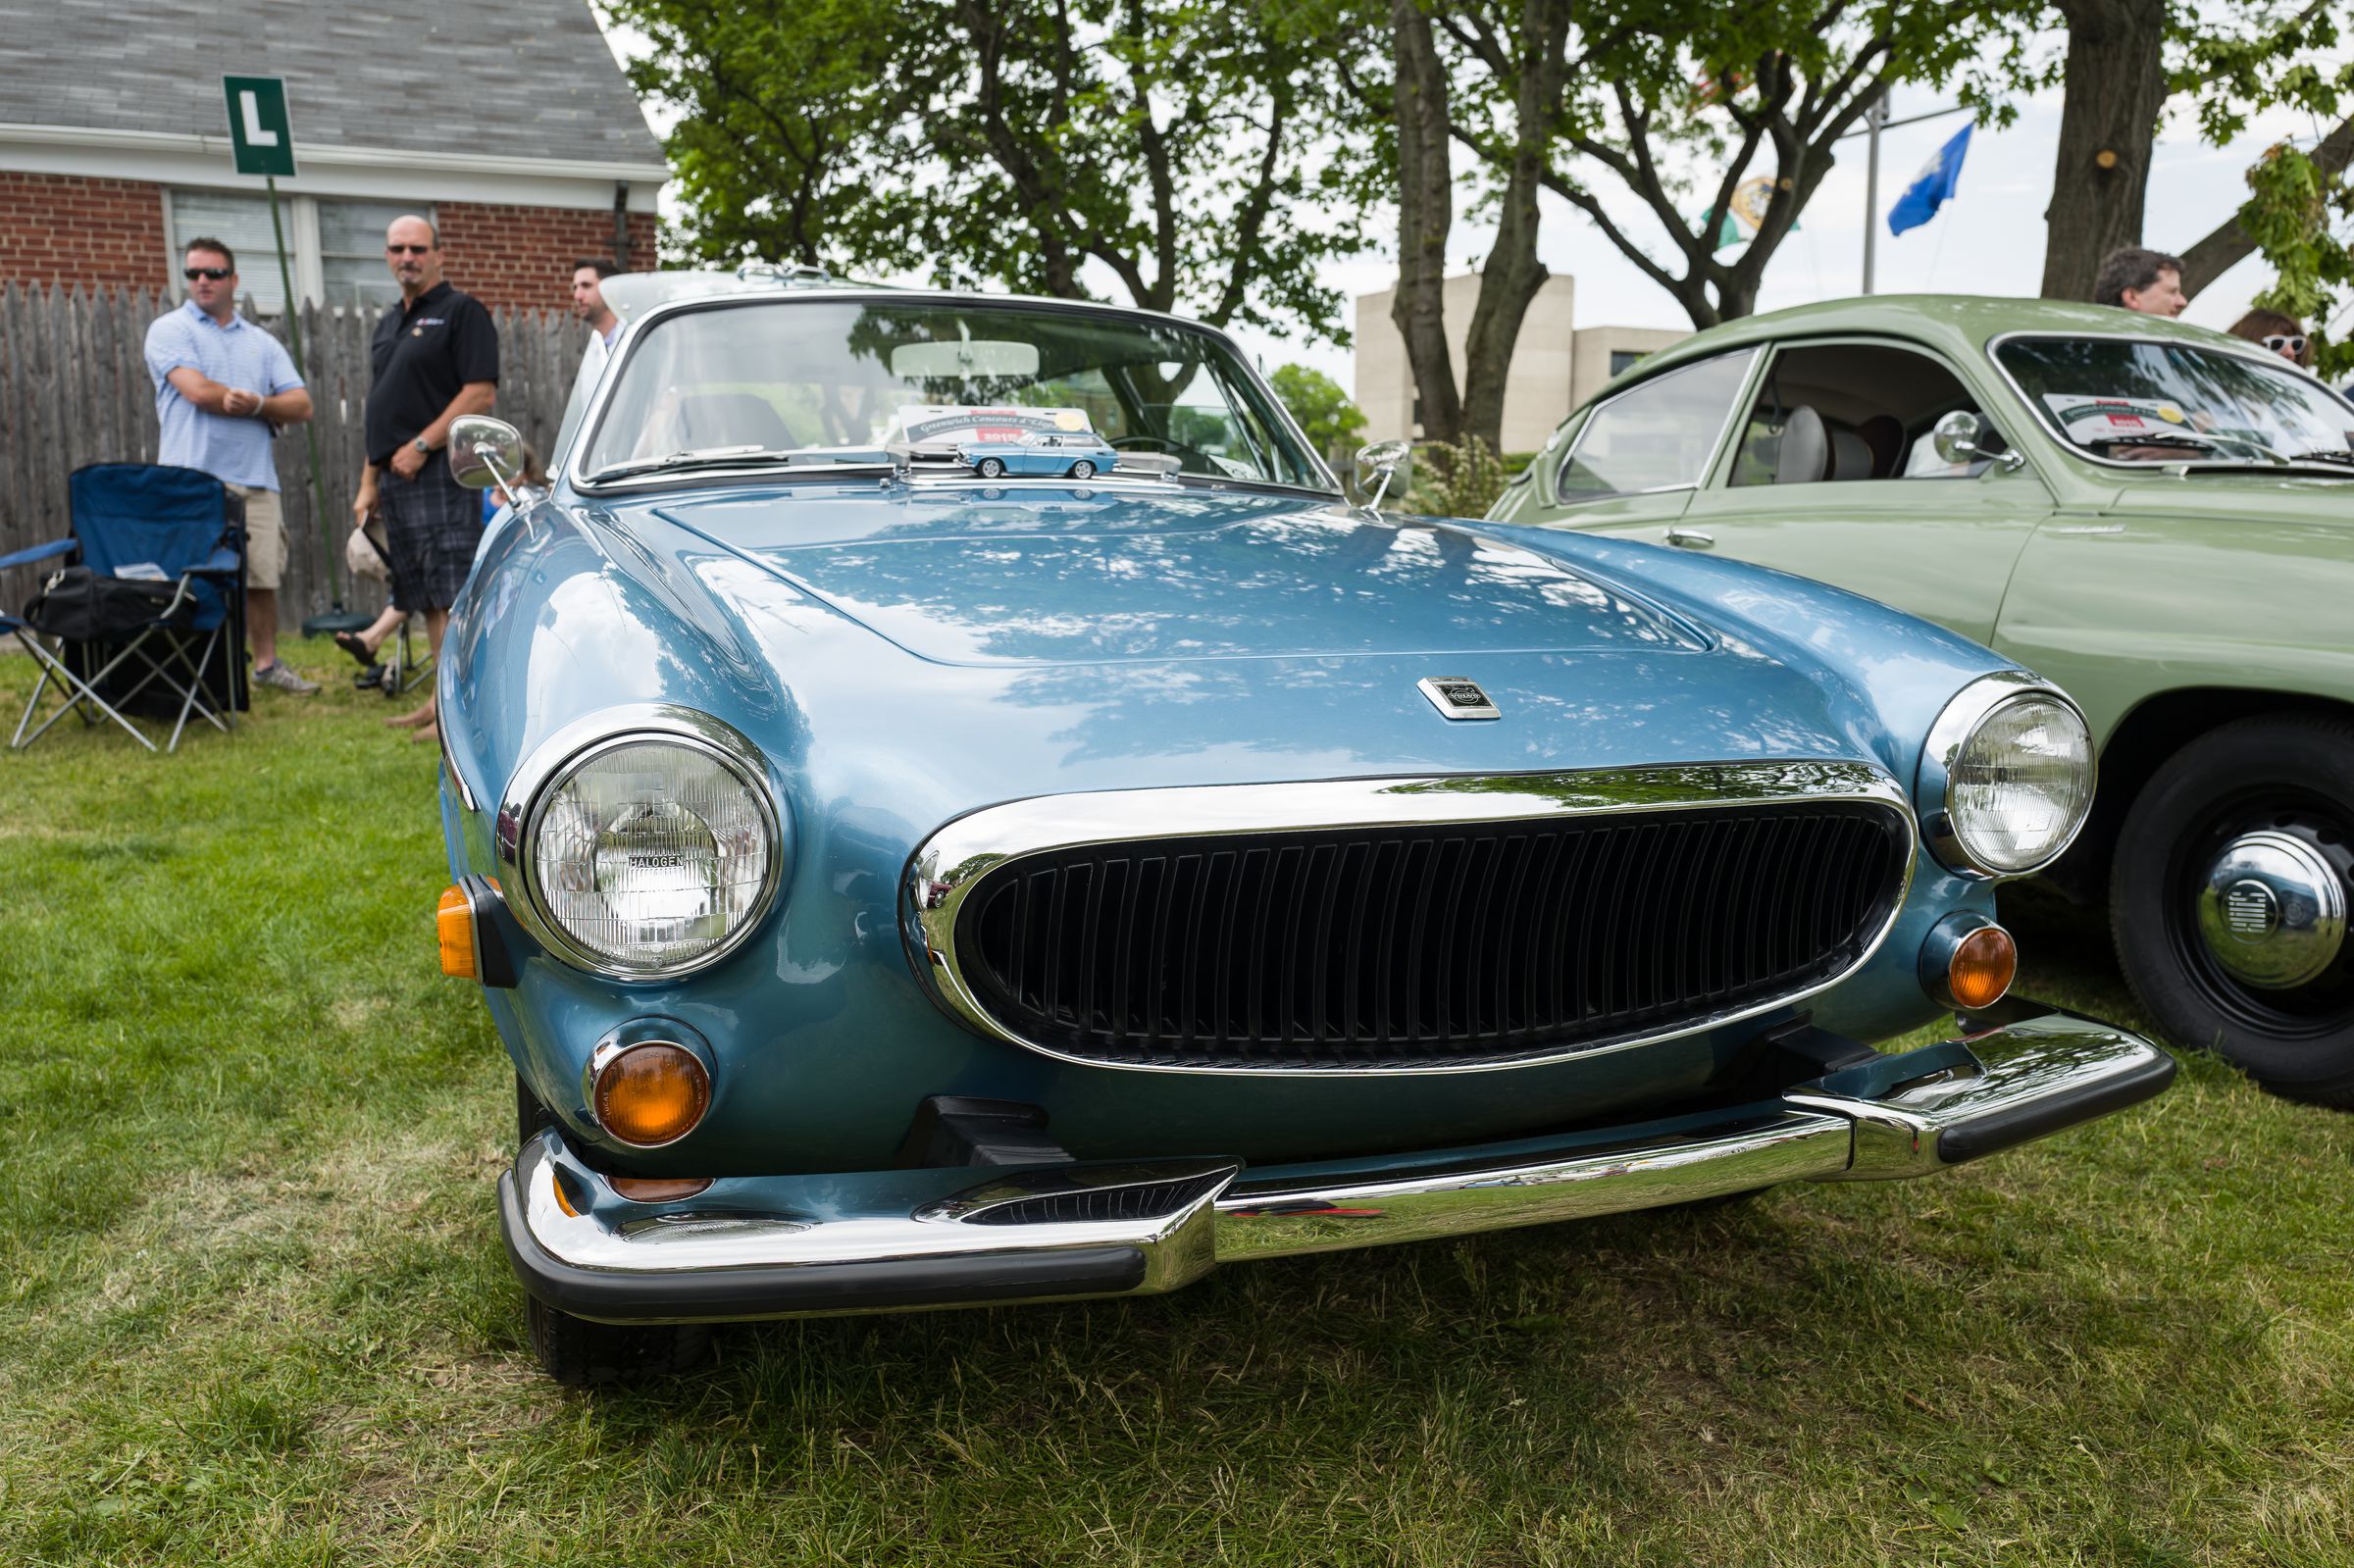 Using the Leica Q at the Greenwich Concours d'Elegance